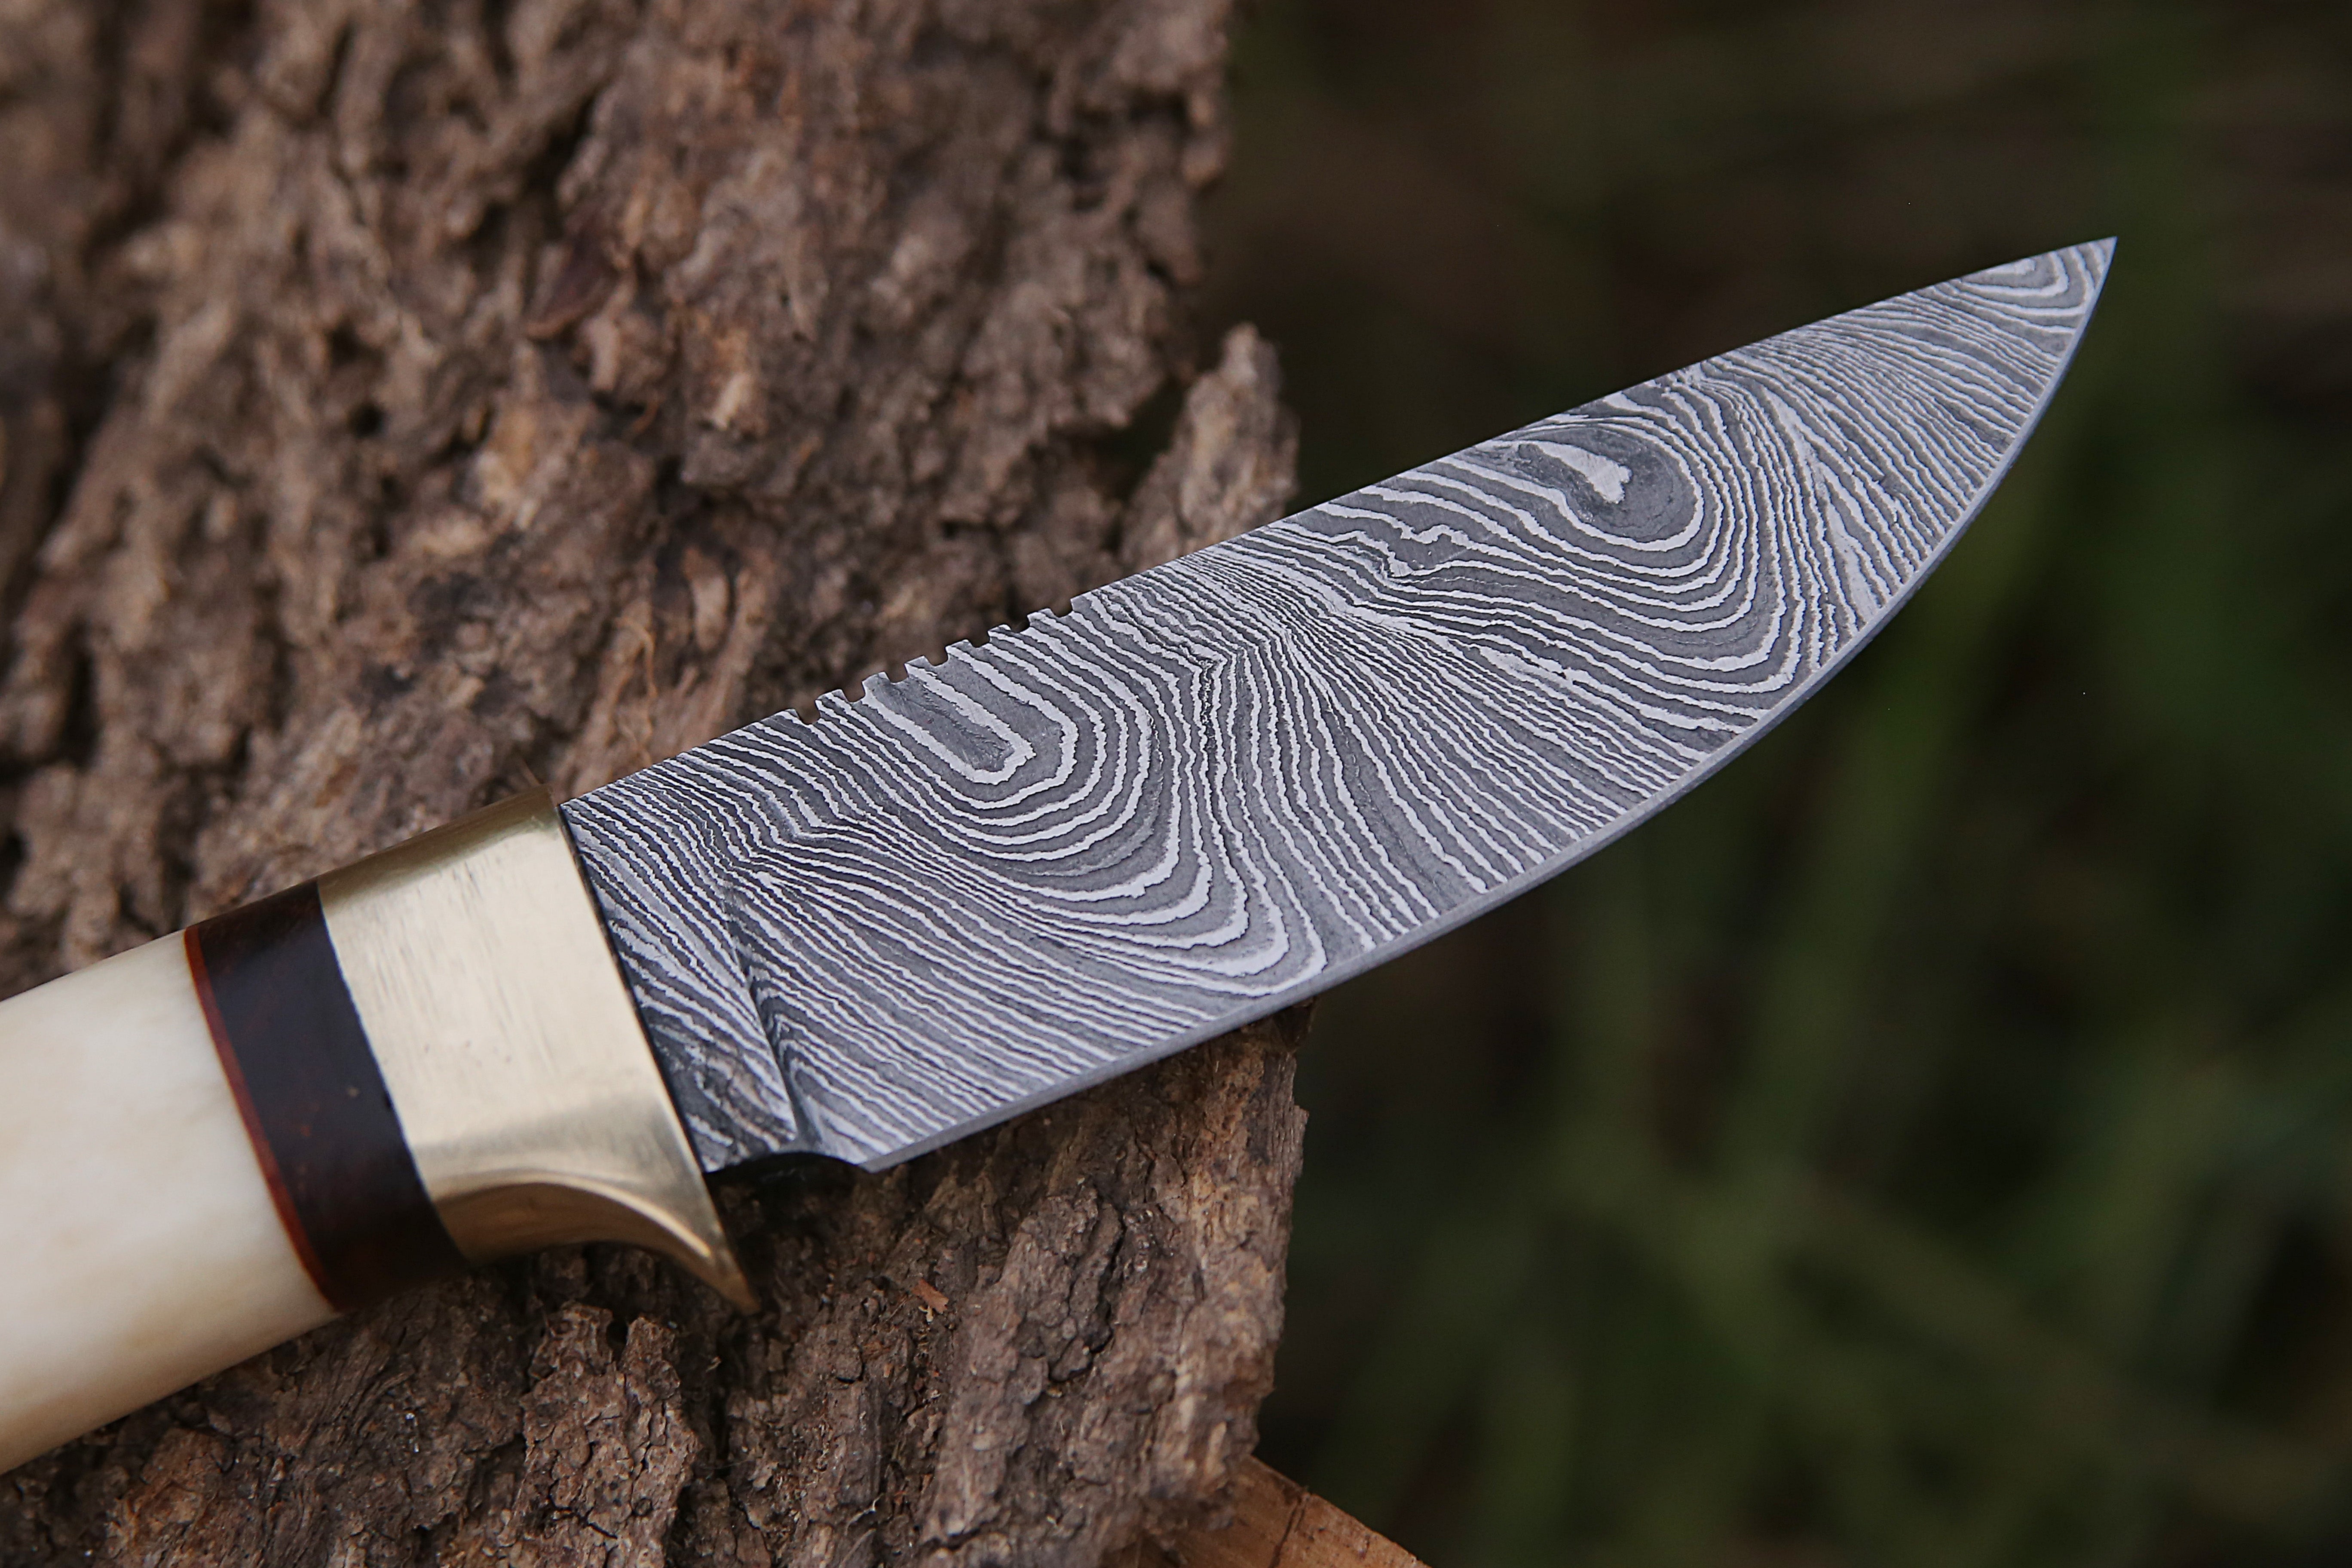 9" Custom Made Damascus Skinner Knife White Bone Handle Hunting Knife With Pouch.